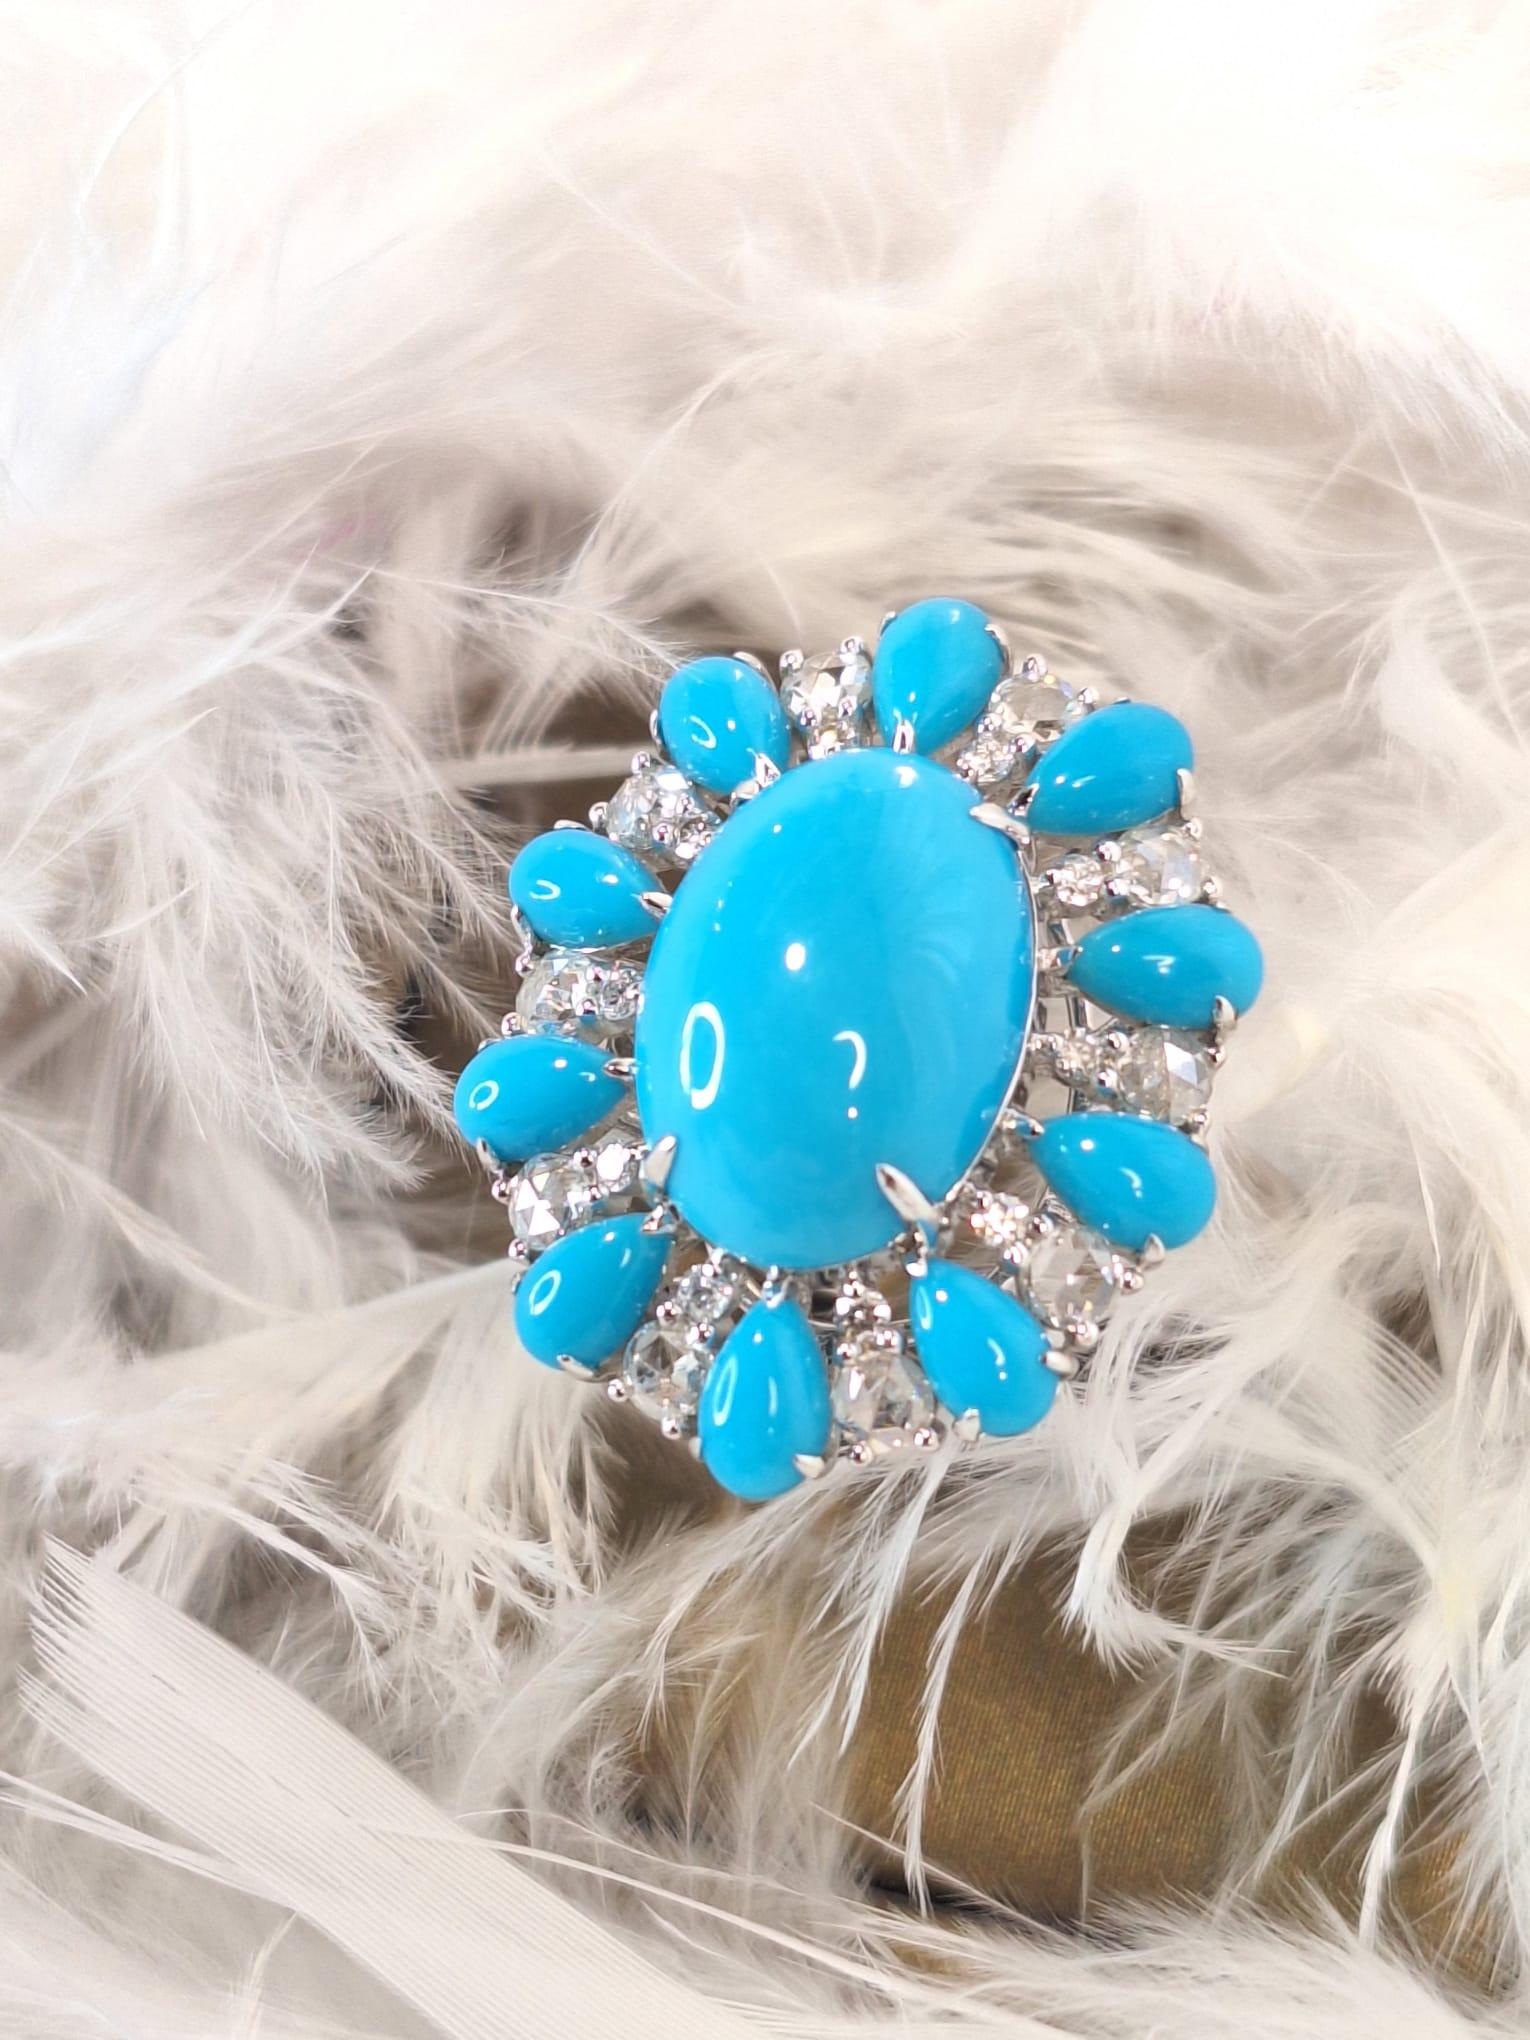 18K White Gold Diamond Ring with Turquoise

Turquoise is known for its ability to cleanse negative energy, bring good fortune.

Diamonds symbolise clarity and purity, also represent innocence, strength, and true love.

The ring setting with